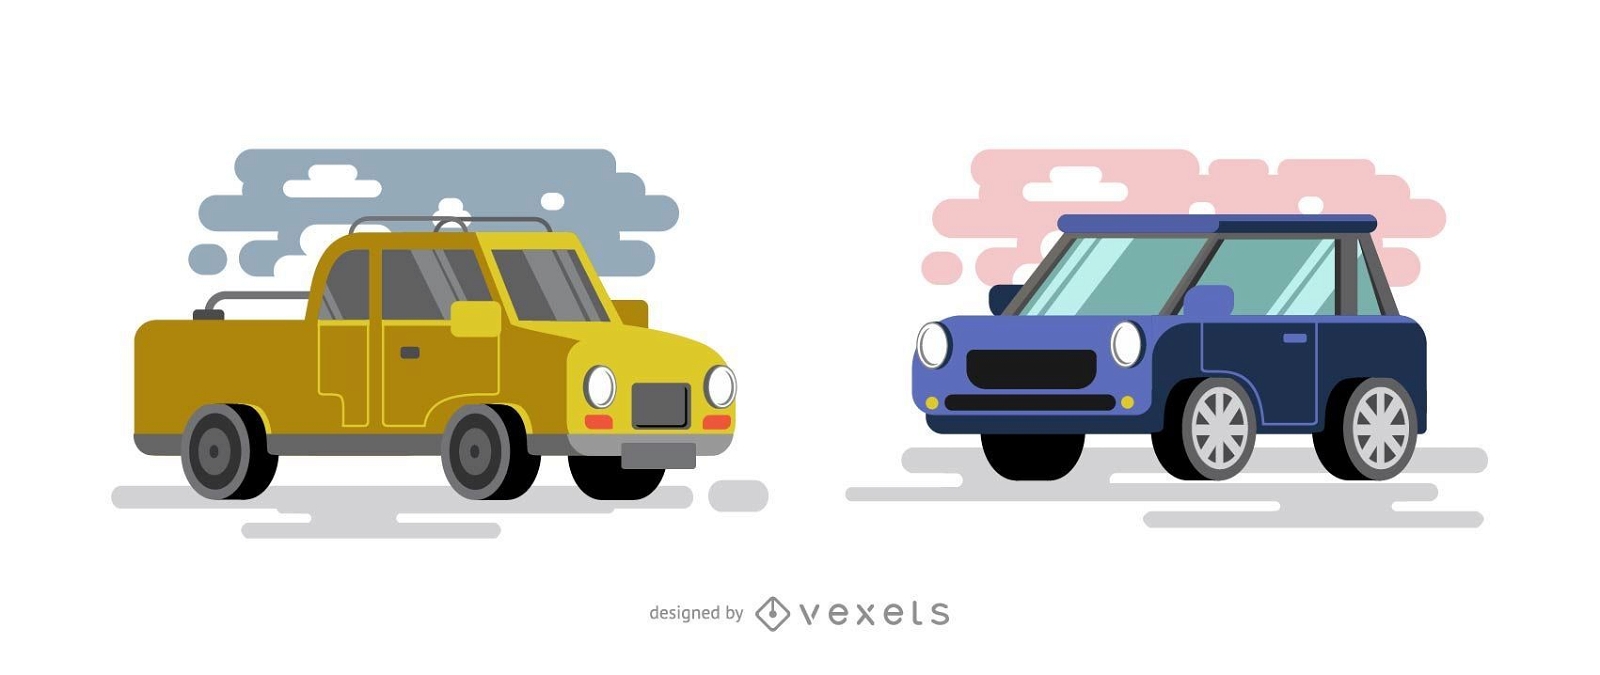 Flat Yellow and Blue Cars Illustration